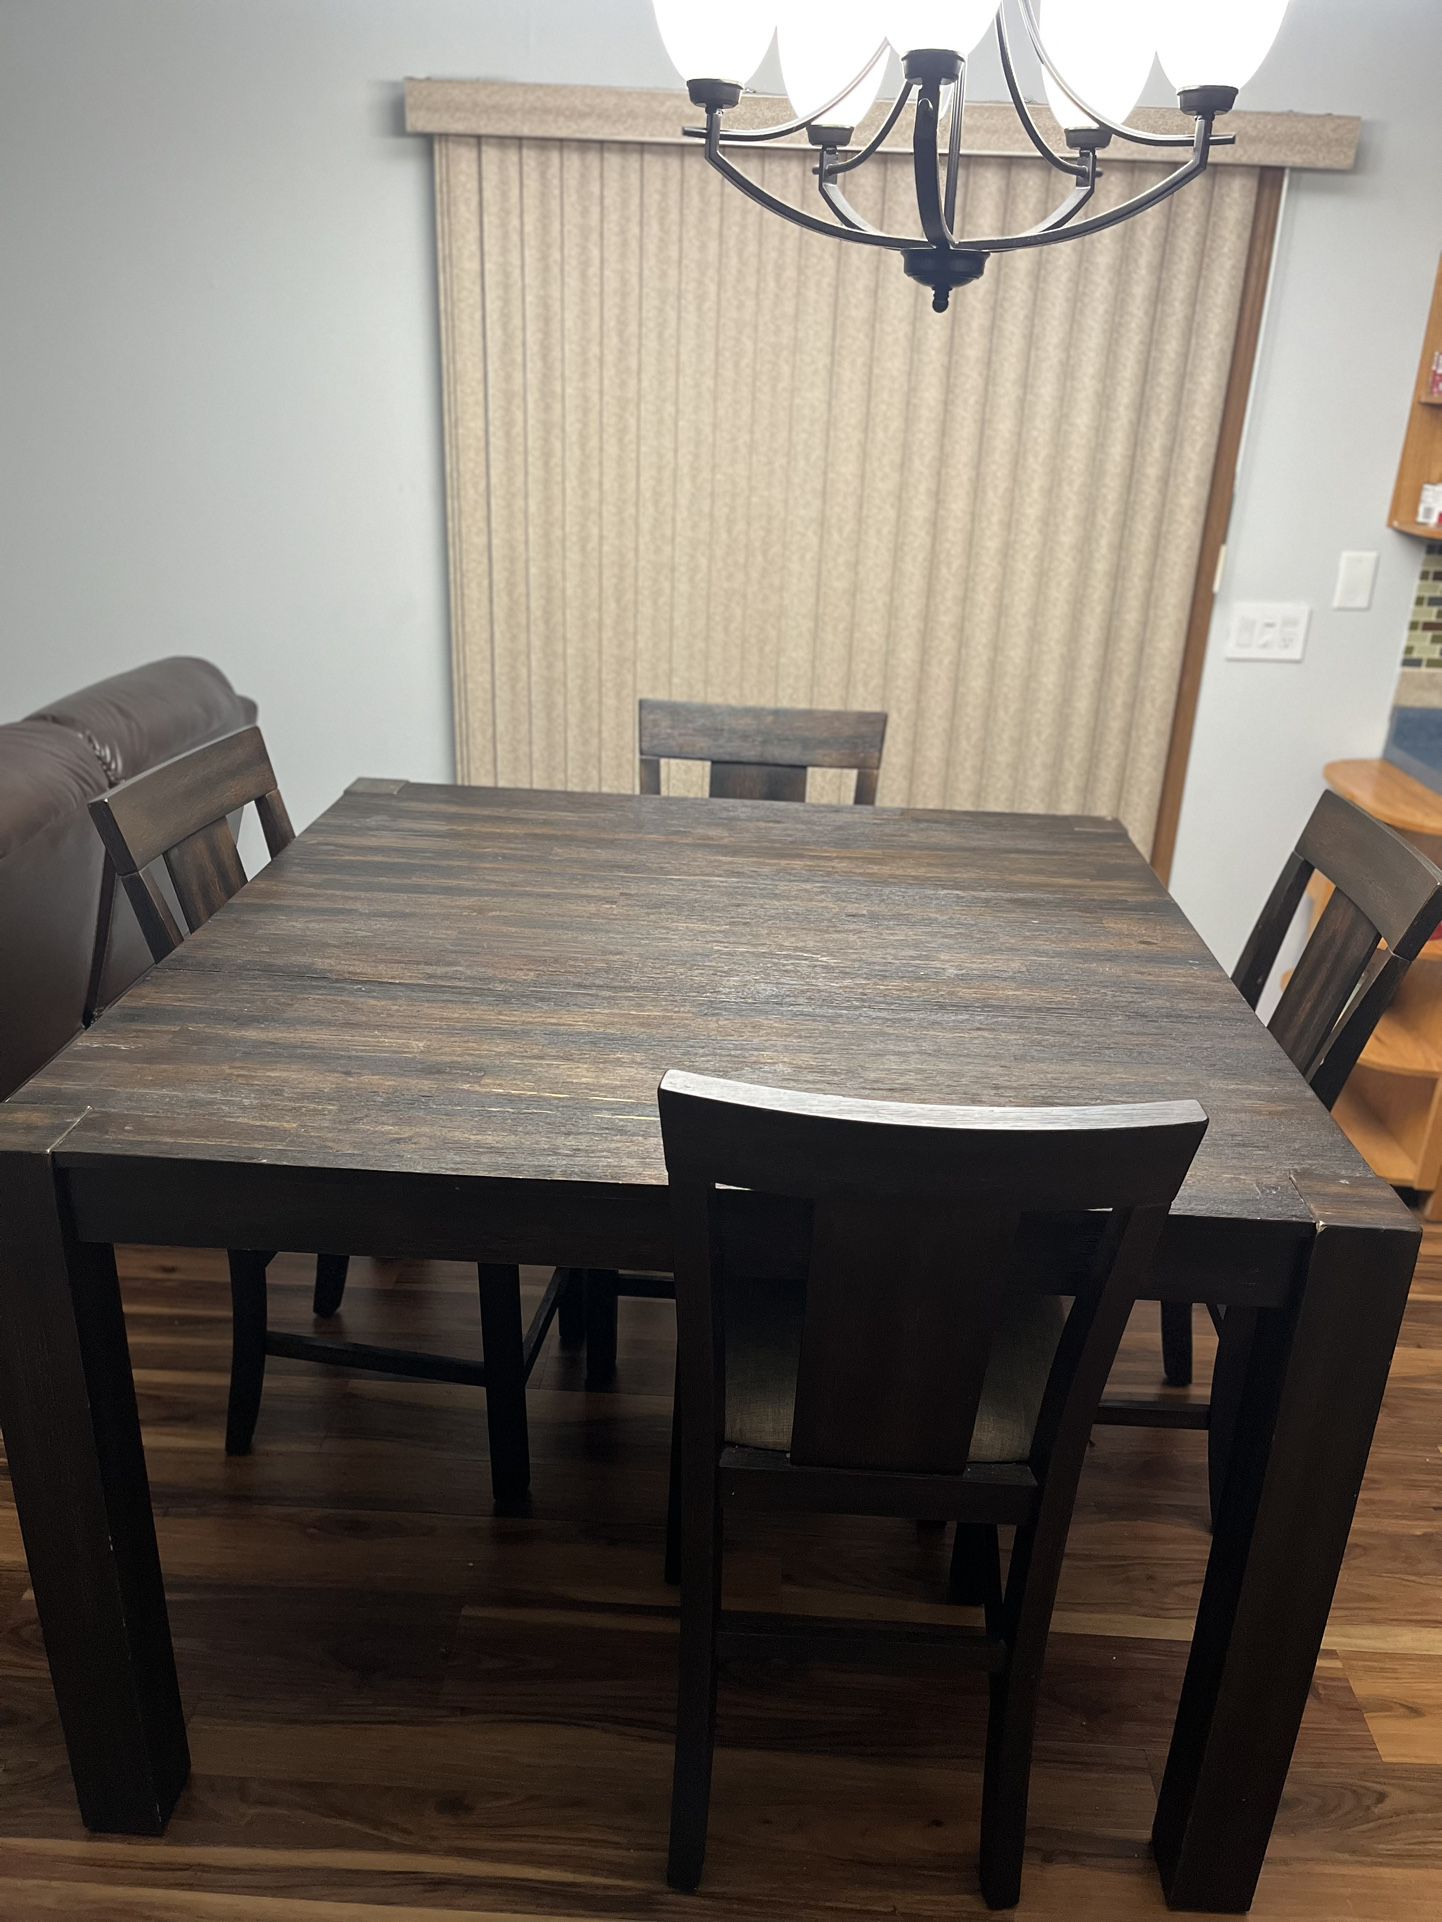 8 Seater High Dining Table 